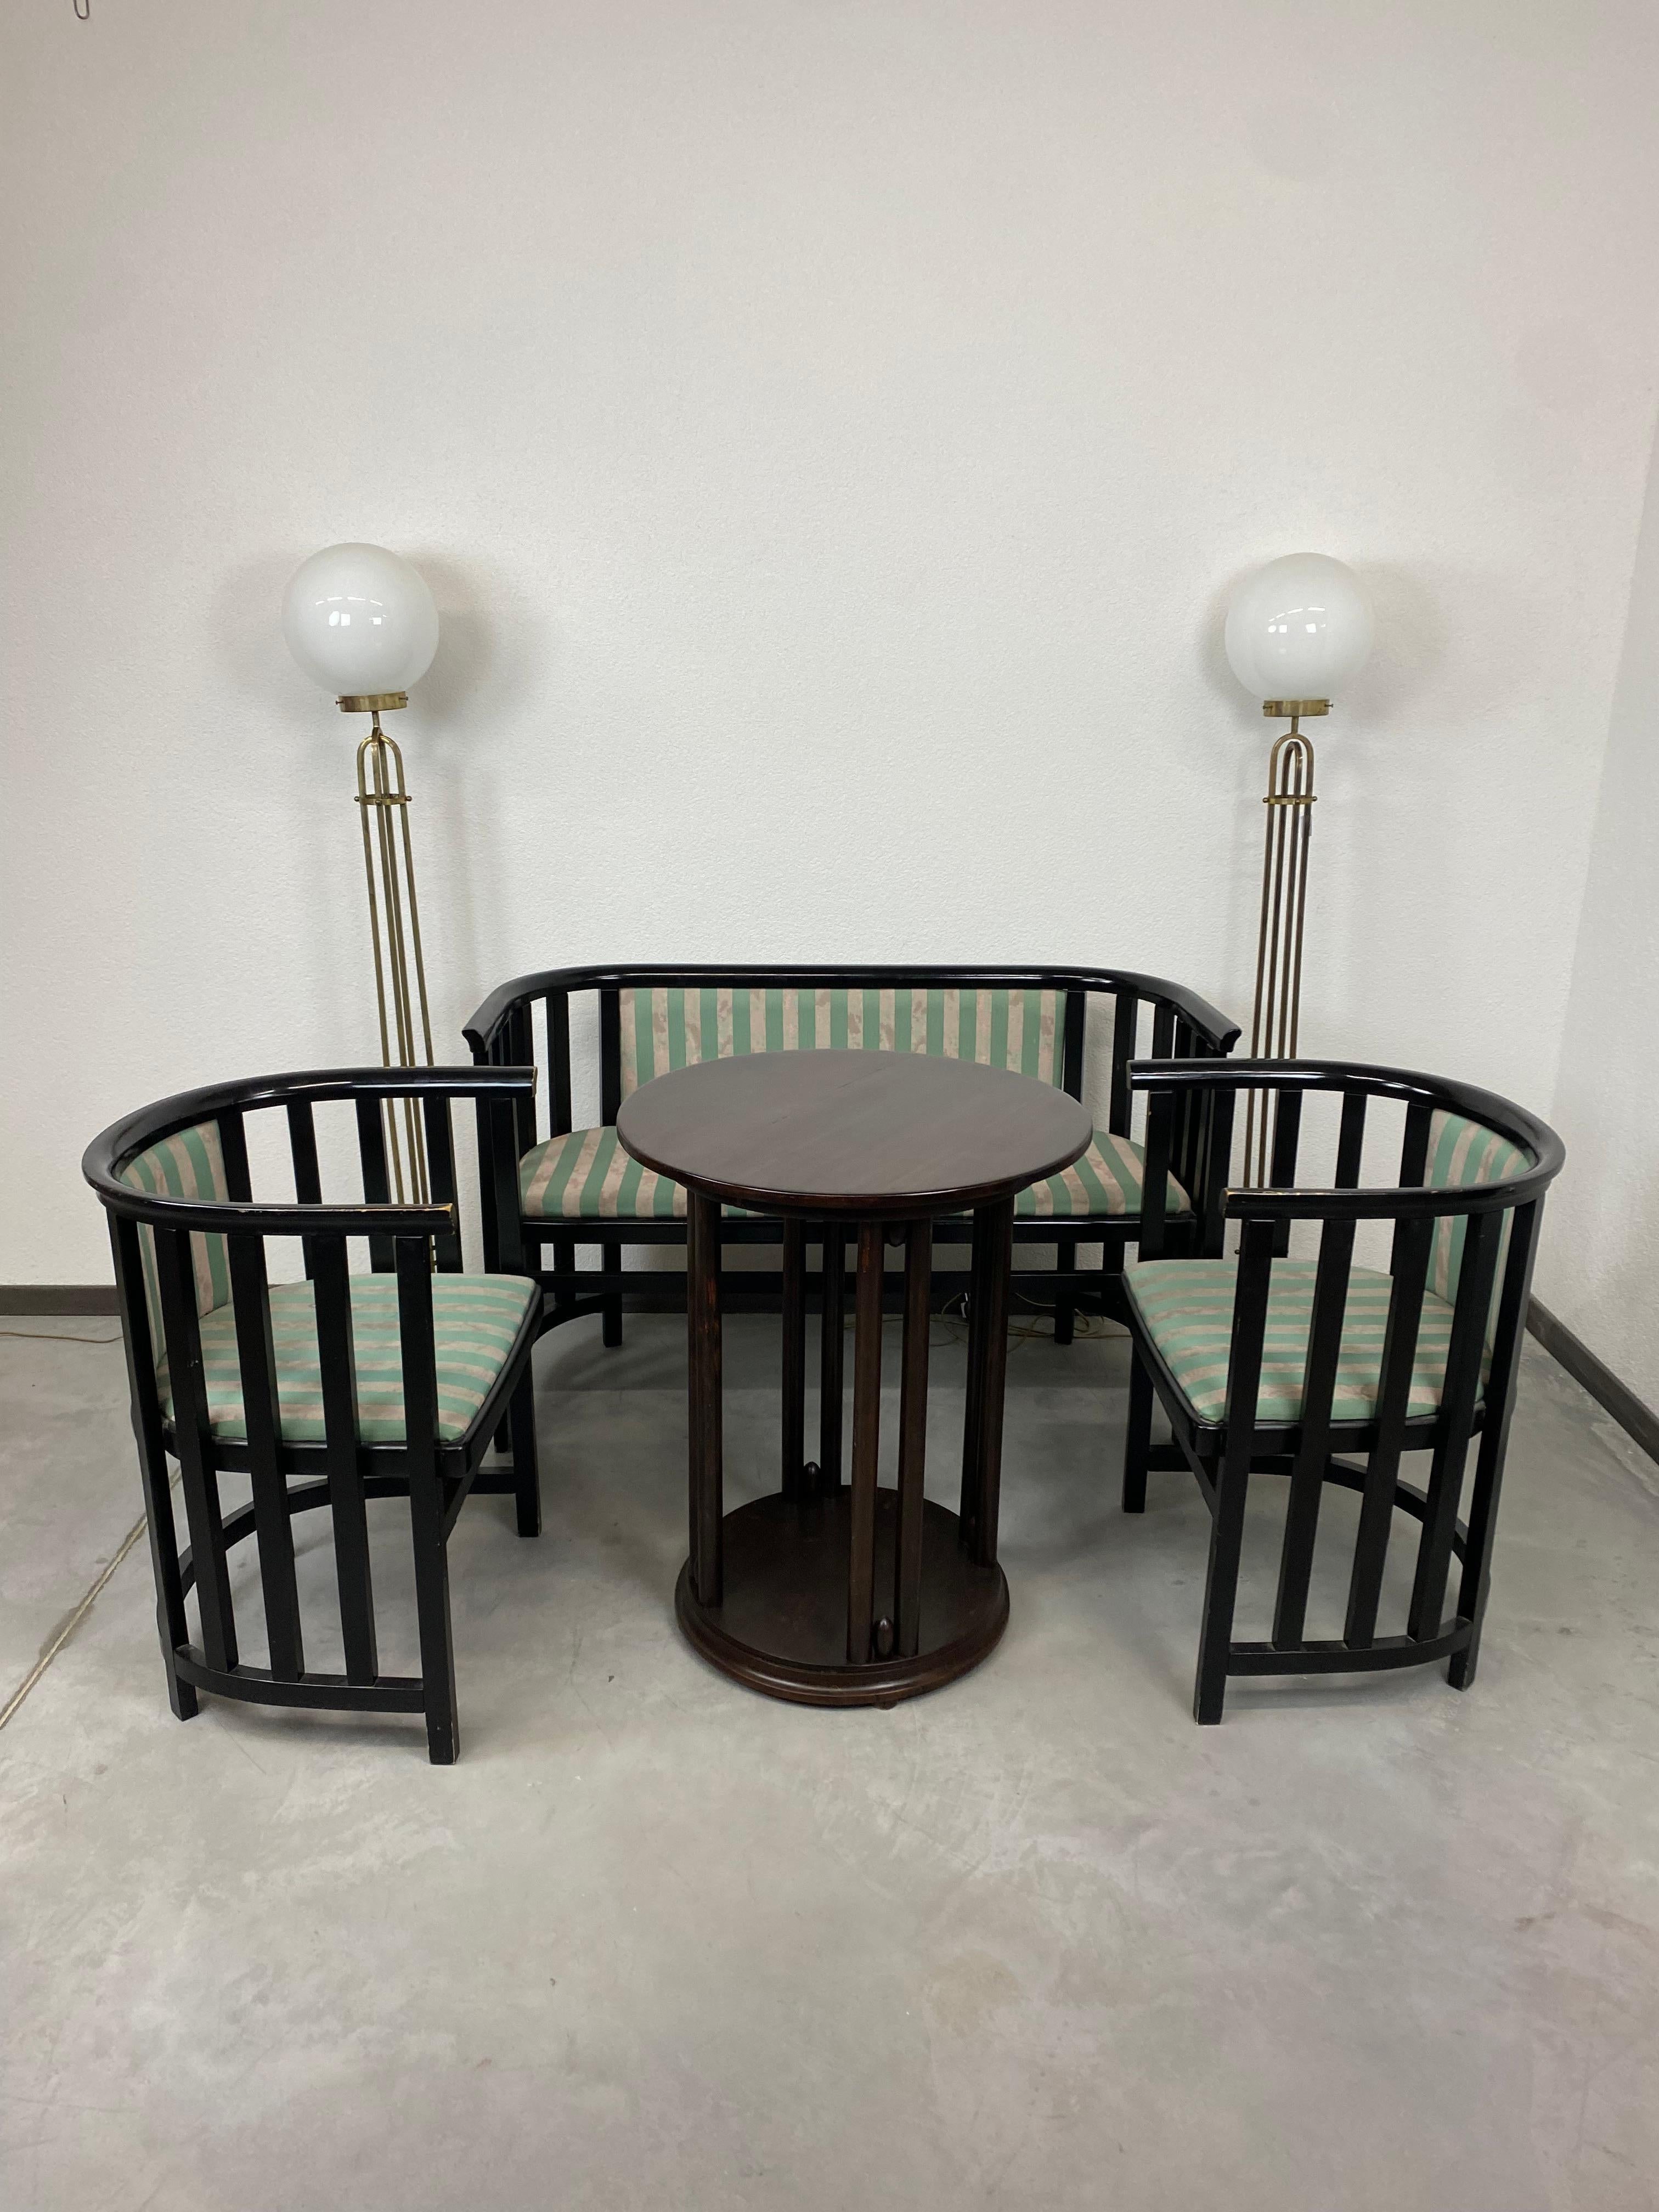 Vienna Secession Fledermaus Seating Group by Josef Hoffmann Ex. by Wittmann Wien For Sale